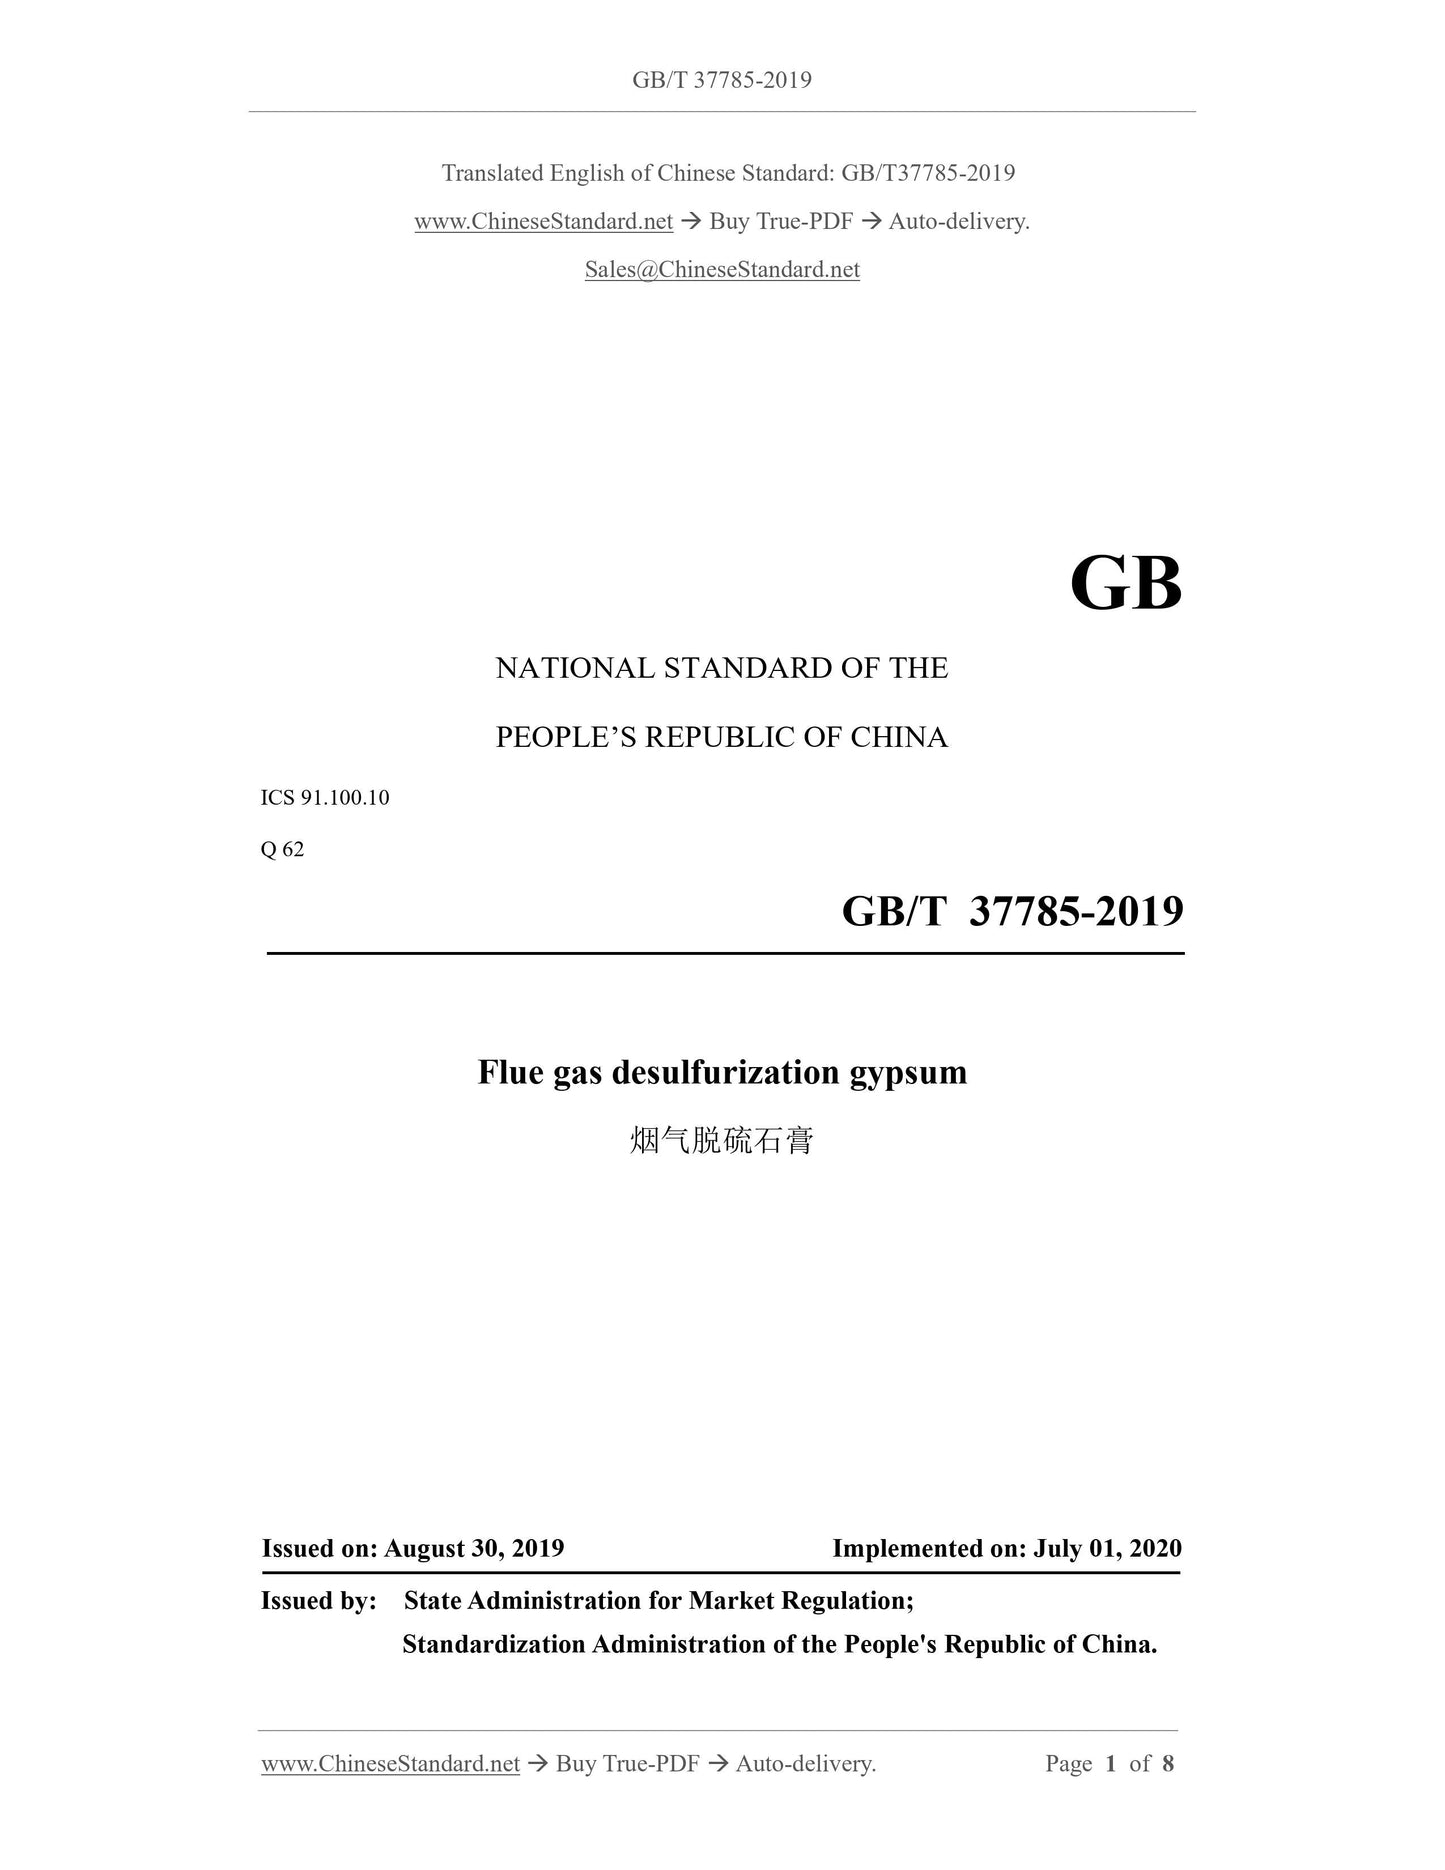 GB/T 37785-2019 Page 1